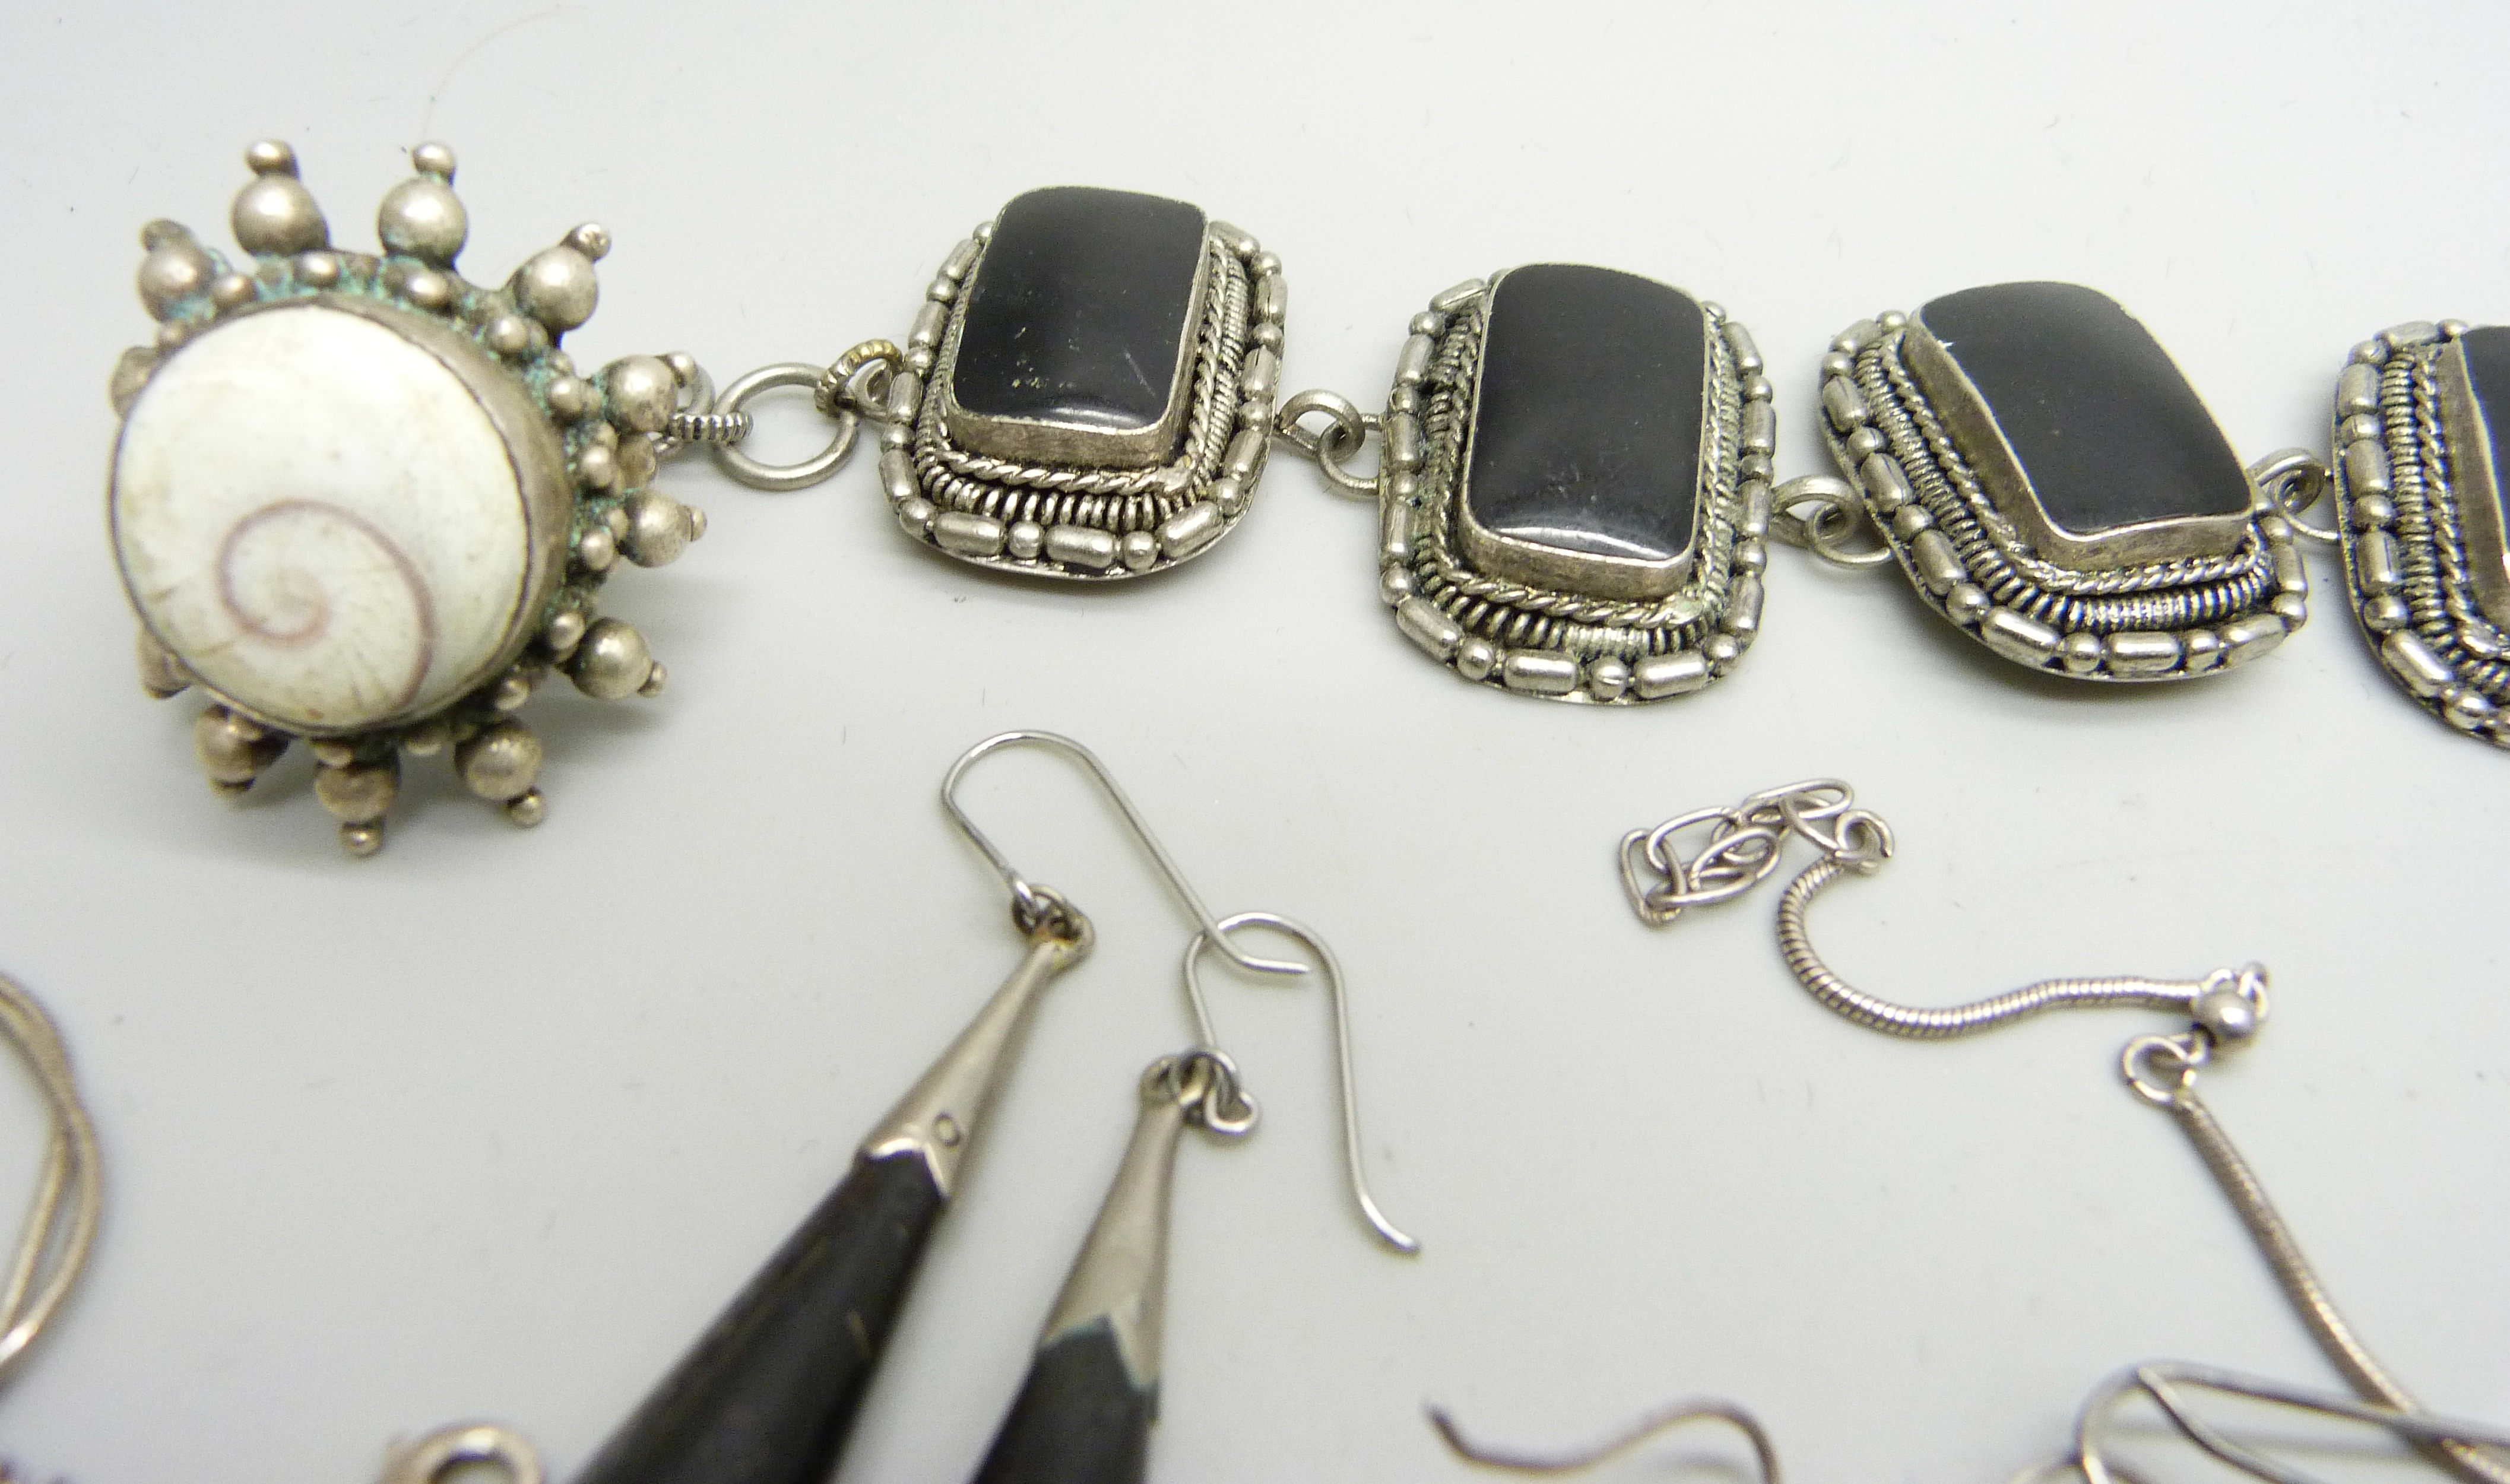 A collection of silver jewellery including a necklace with pearl drops, two shell pendants on - Image 2 of 4